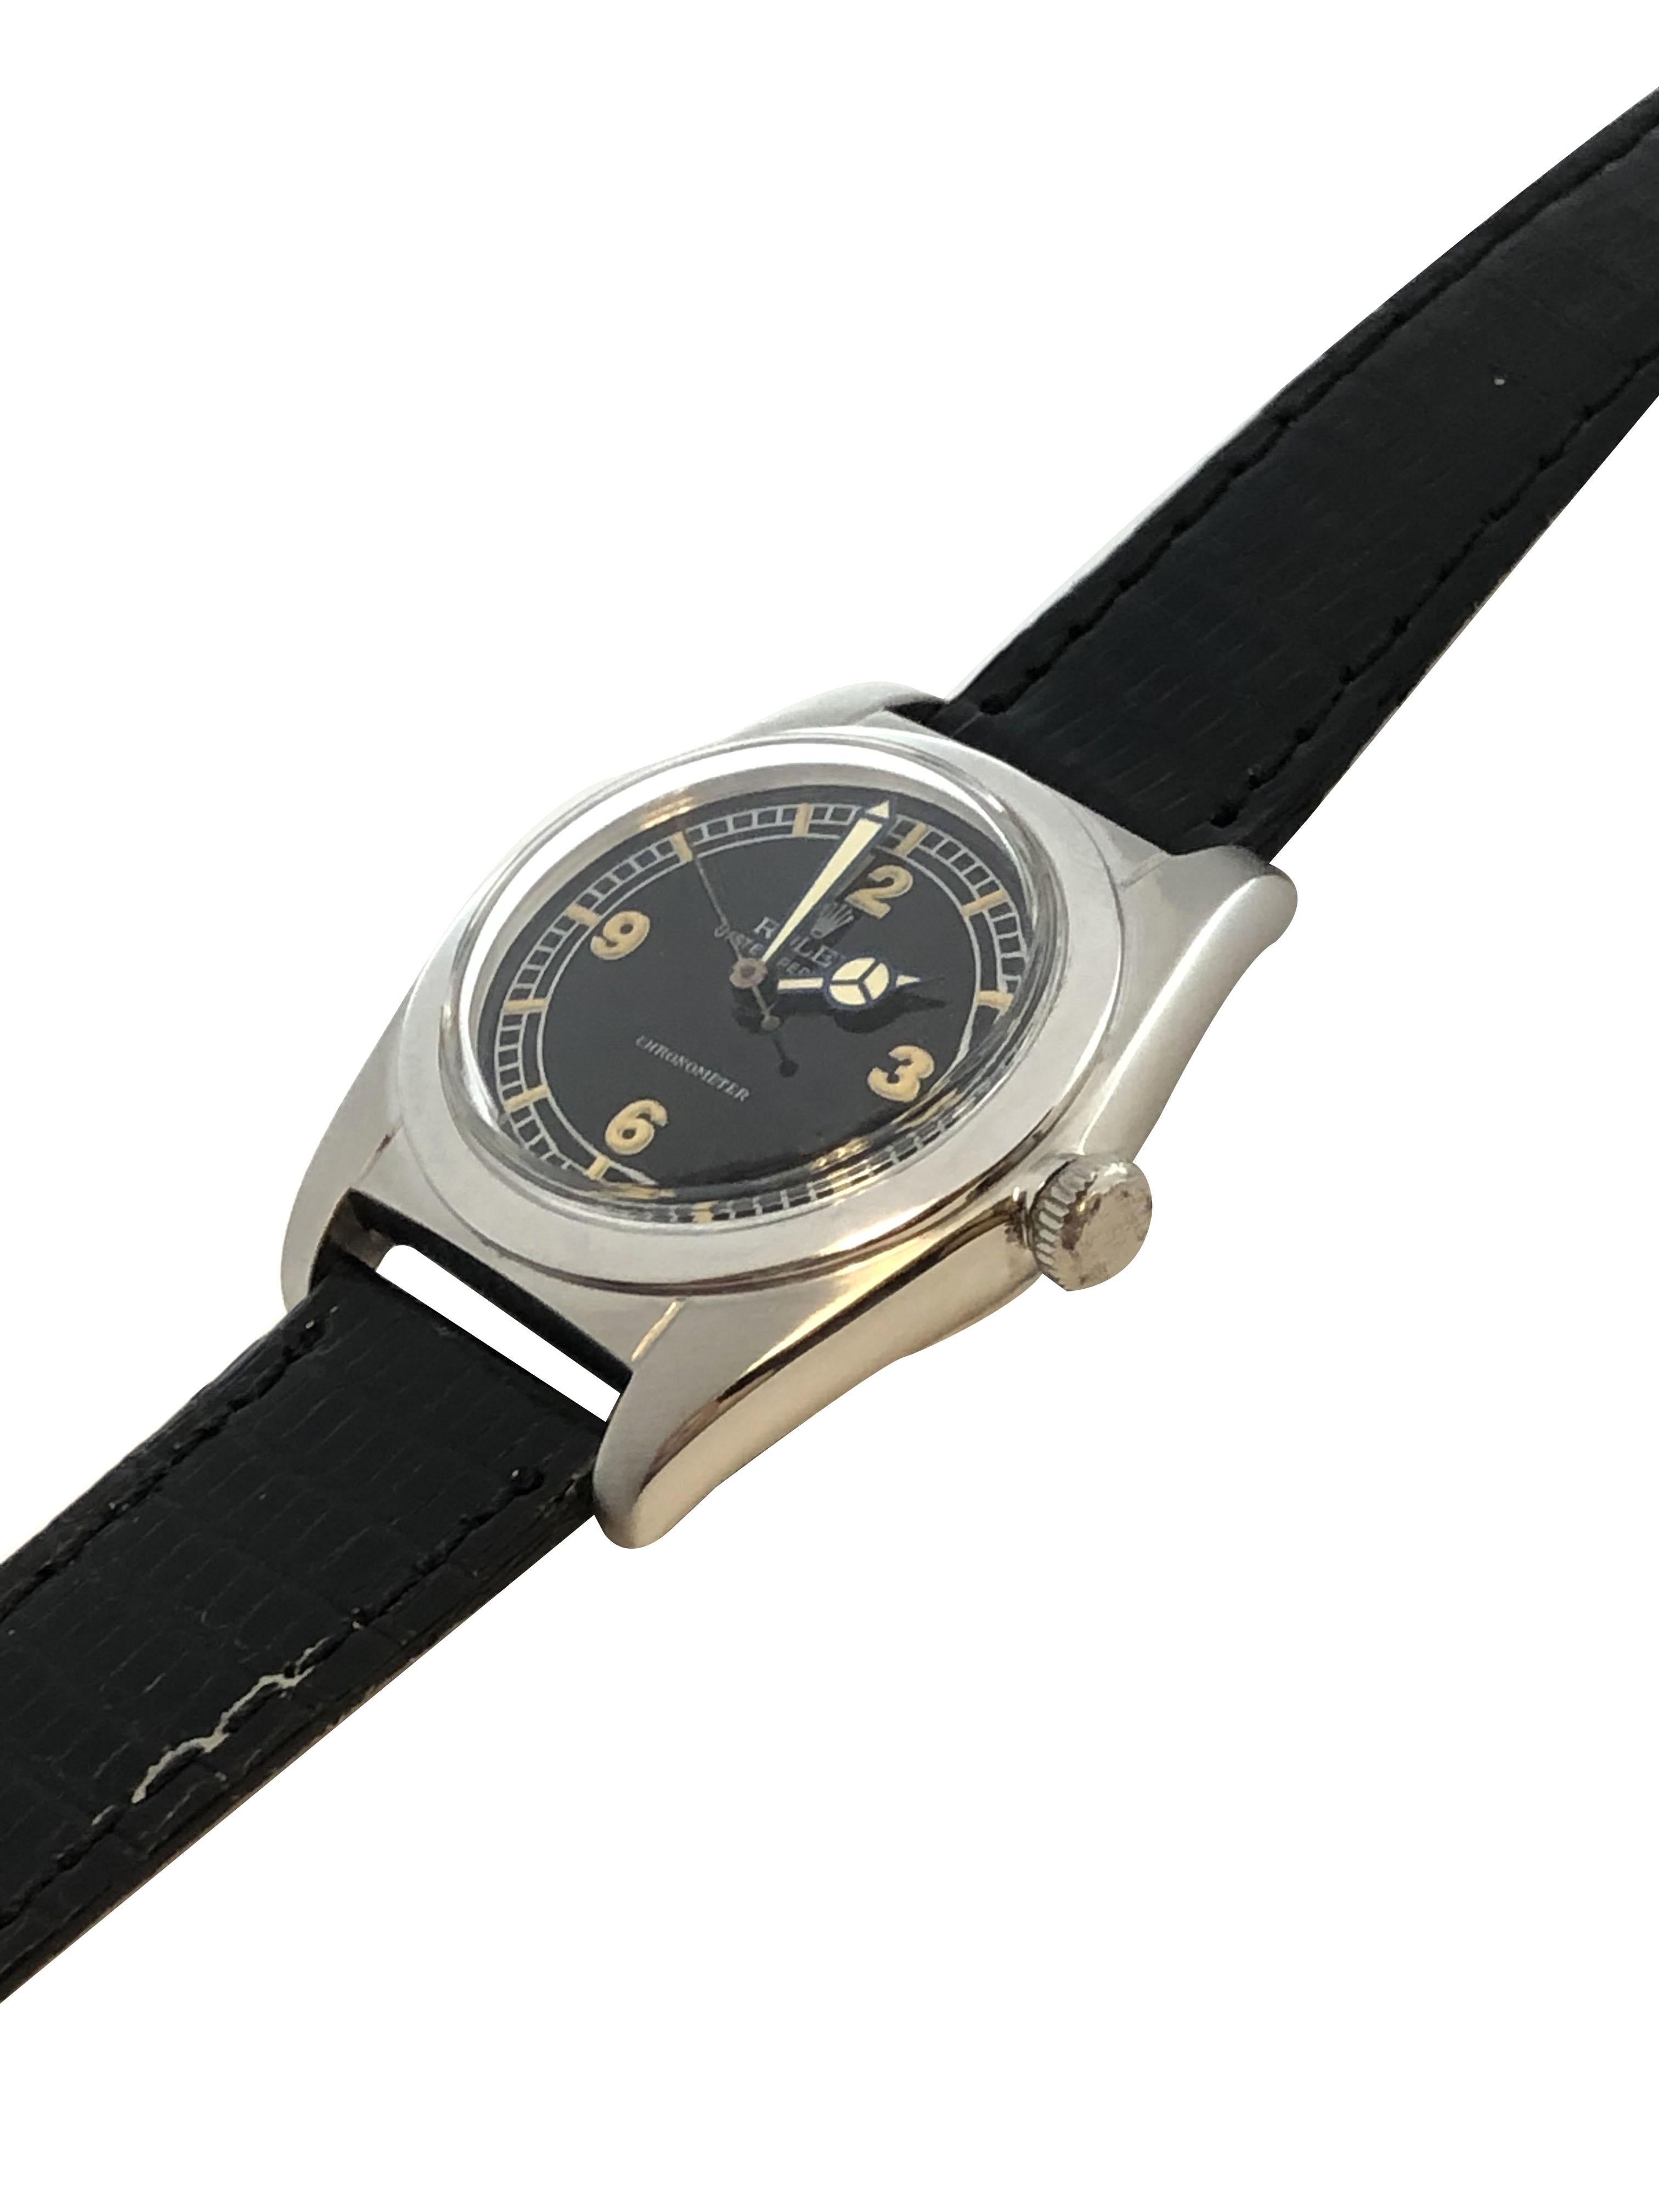 Circa 1946 Rolex Reference 2940  Bubbleback model Wrist Watch, 39 M.M. ( lug end to end ) X 32 M.M. Stainless Steel 2 piece case. 17 Jewel Automatic, self winding movement. Newly restored as original Black Matt Dial with raised white painted